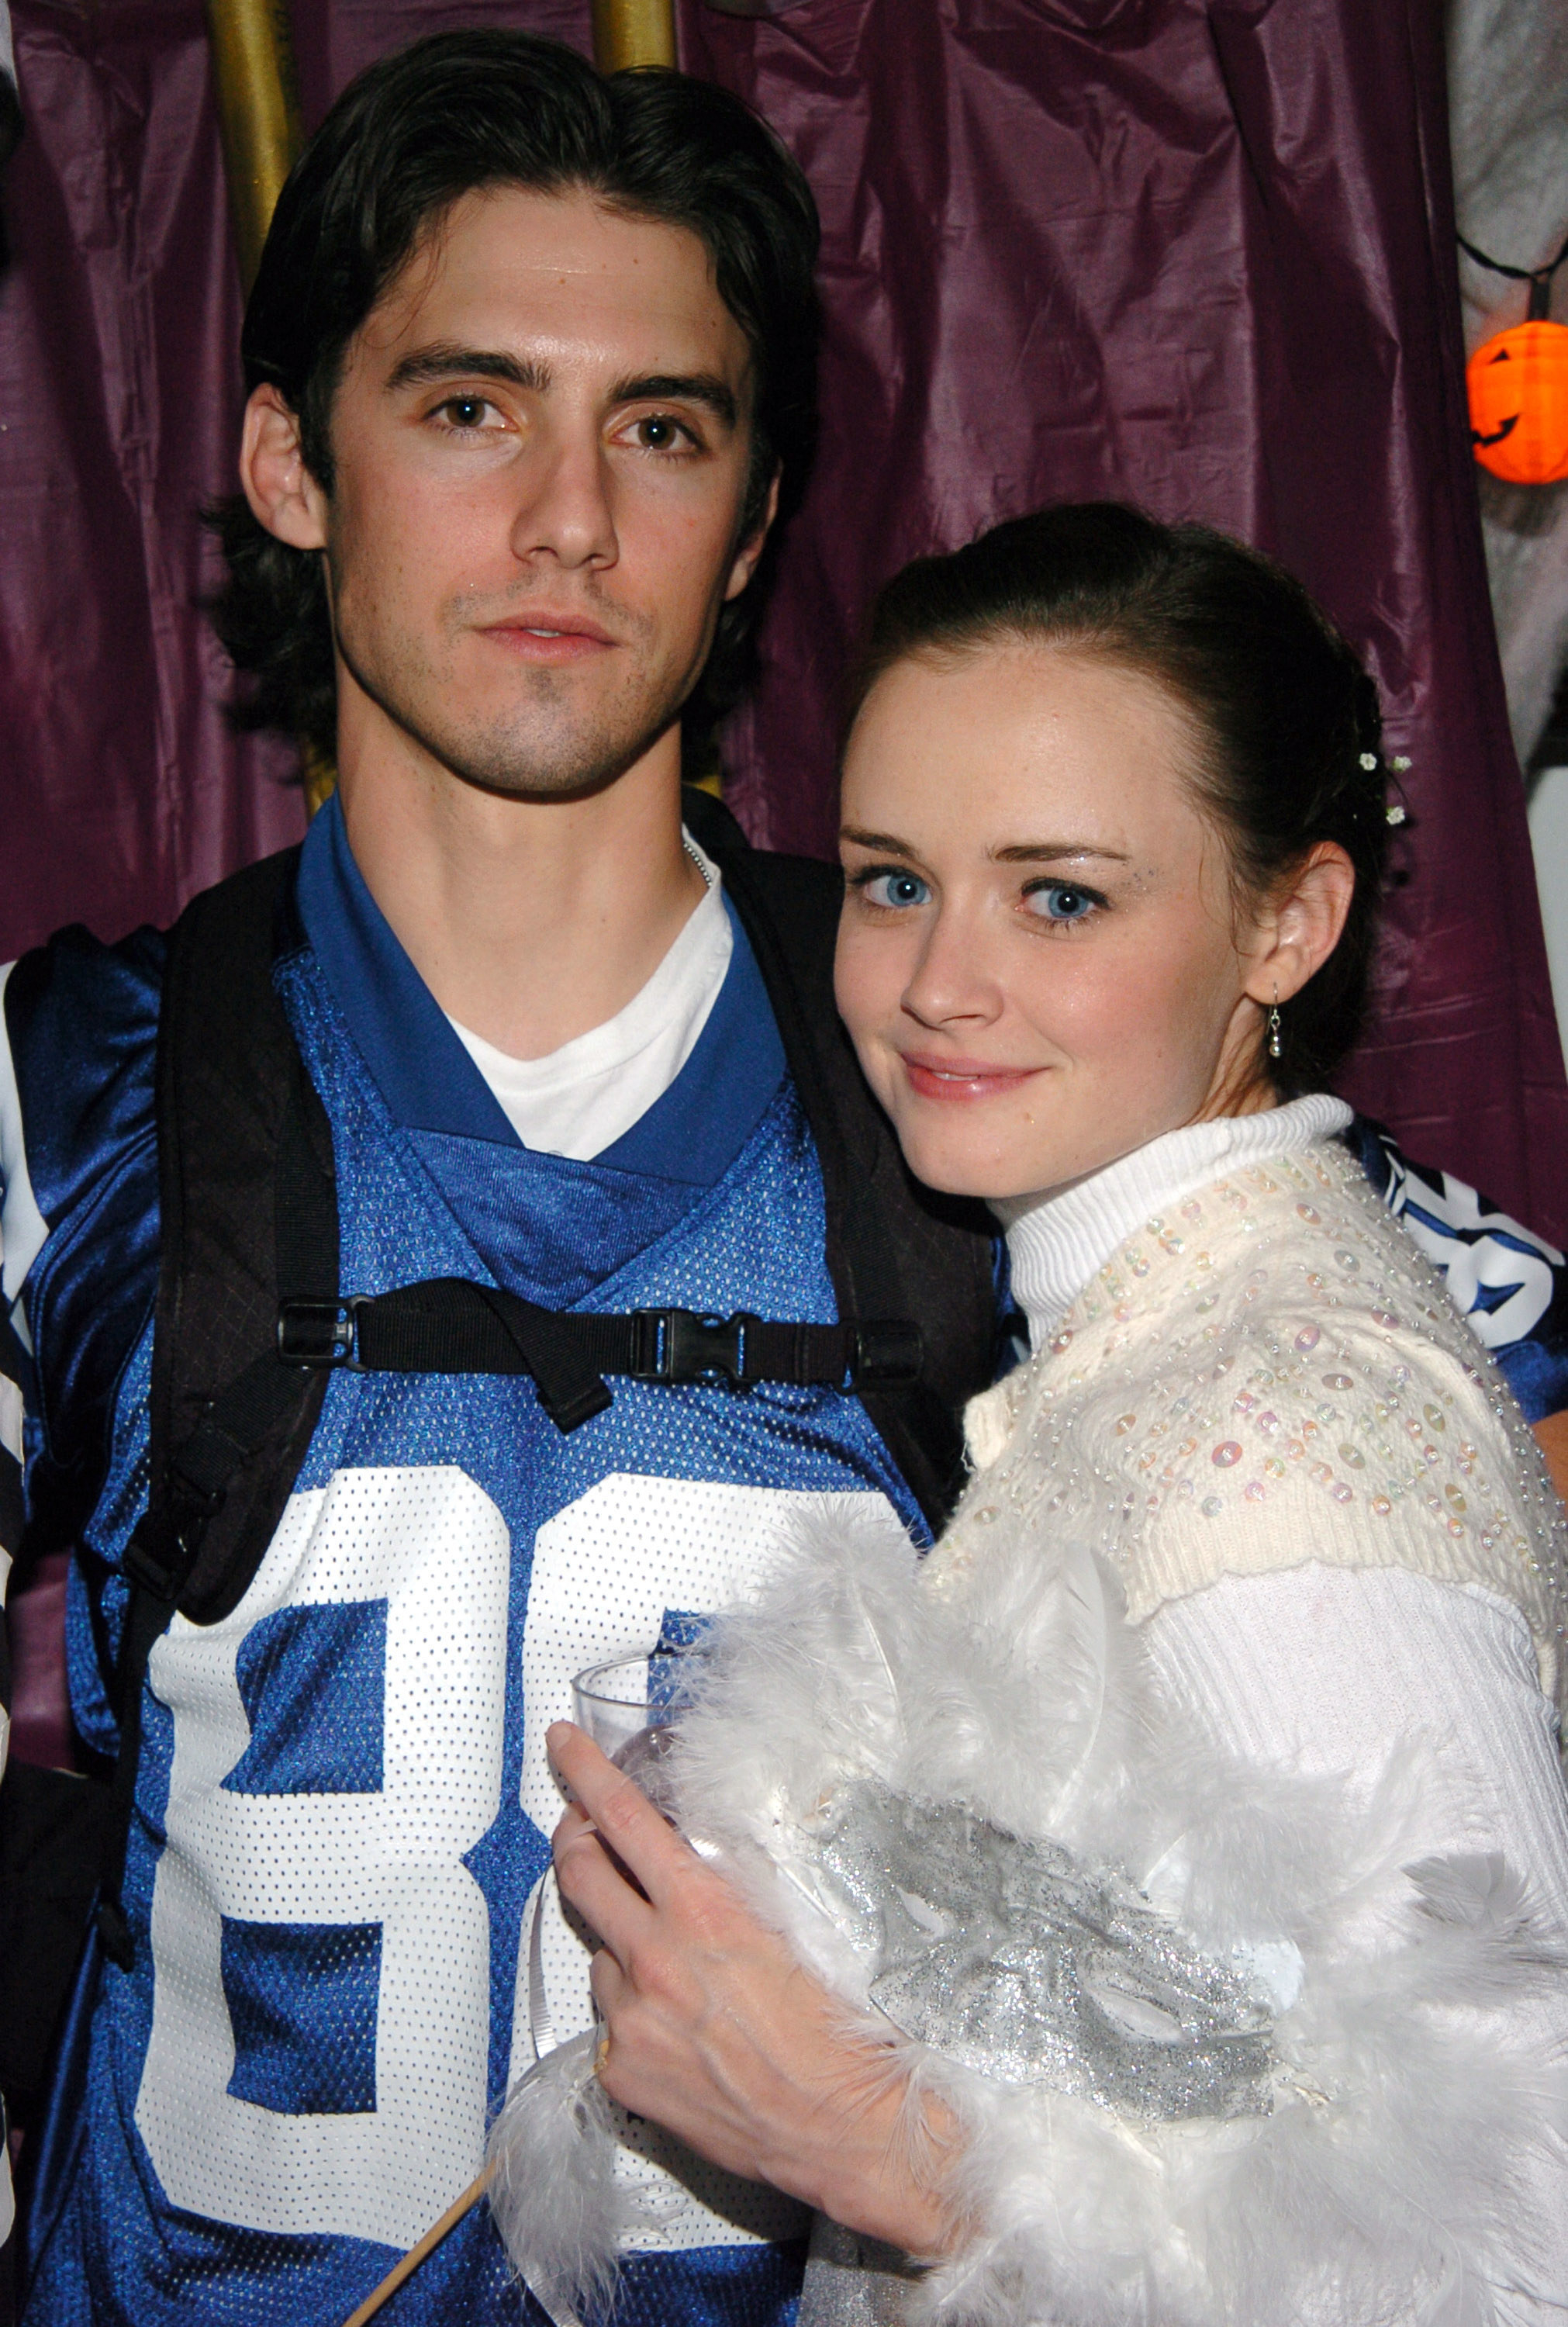 Milo Ventimiglia in a football jersey standing next to Alexis Bledel who&#x27;s wearing a  sequined sweater